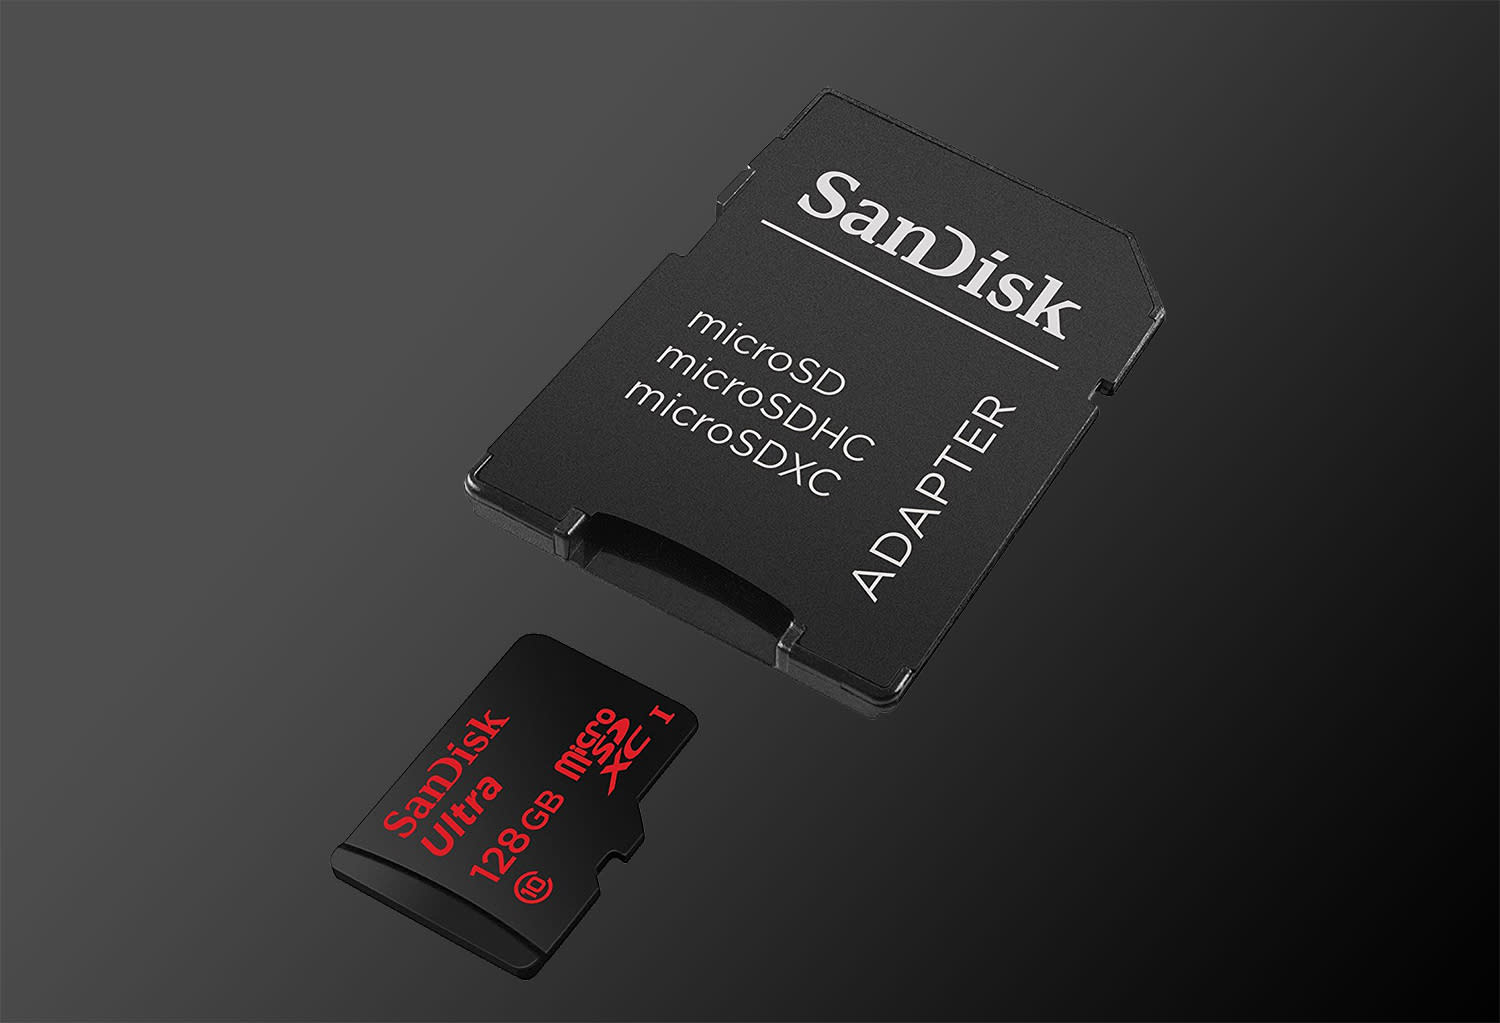 Hurry: SanDisk Ultra 128GB microSD cards are just $29.99 right now on Amazon